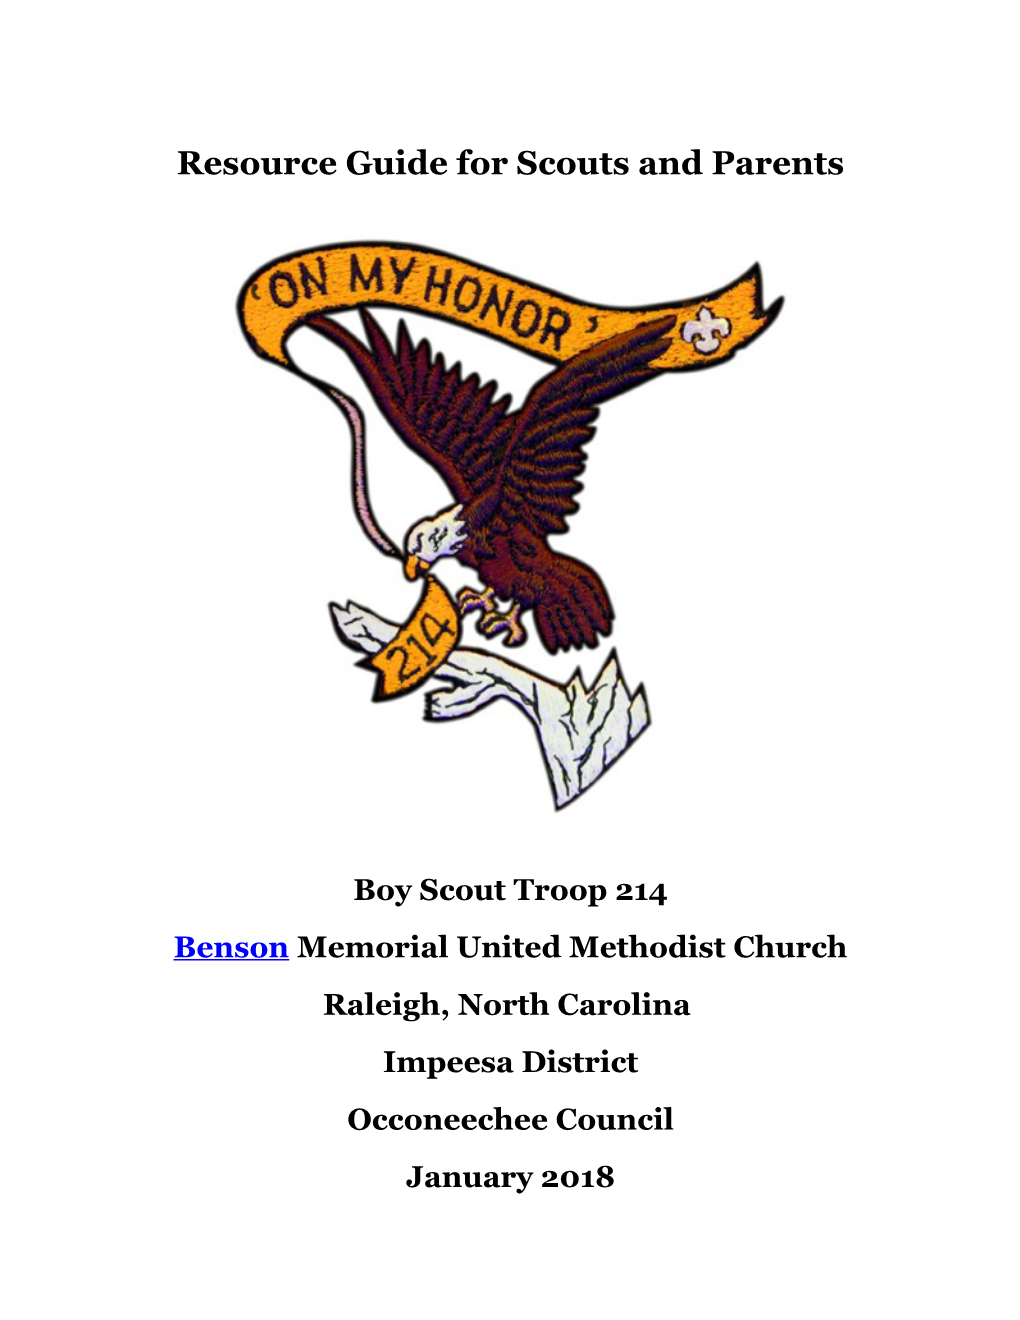 Guide for New Scouts and Parents